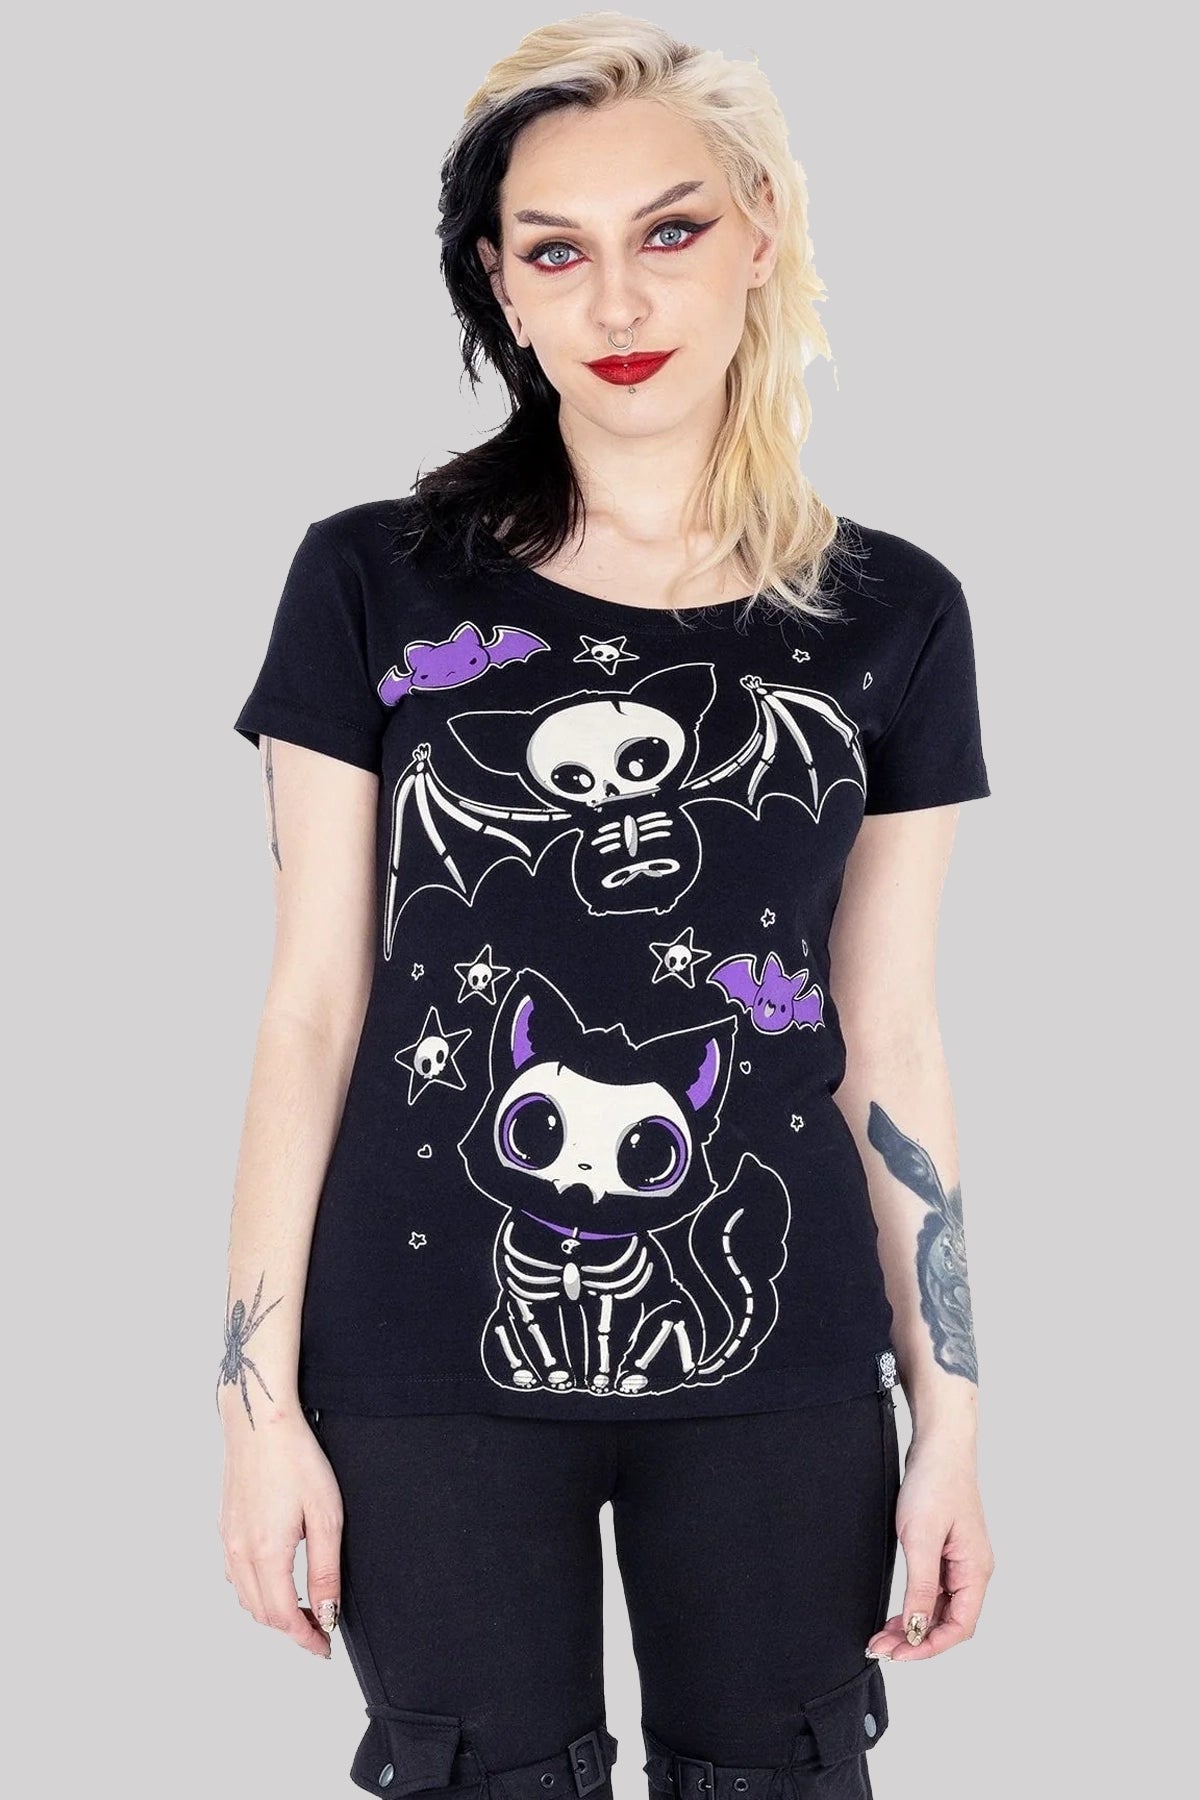 Cupcake Cult Skelly Cat Gothic Punk T-shirt